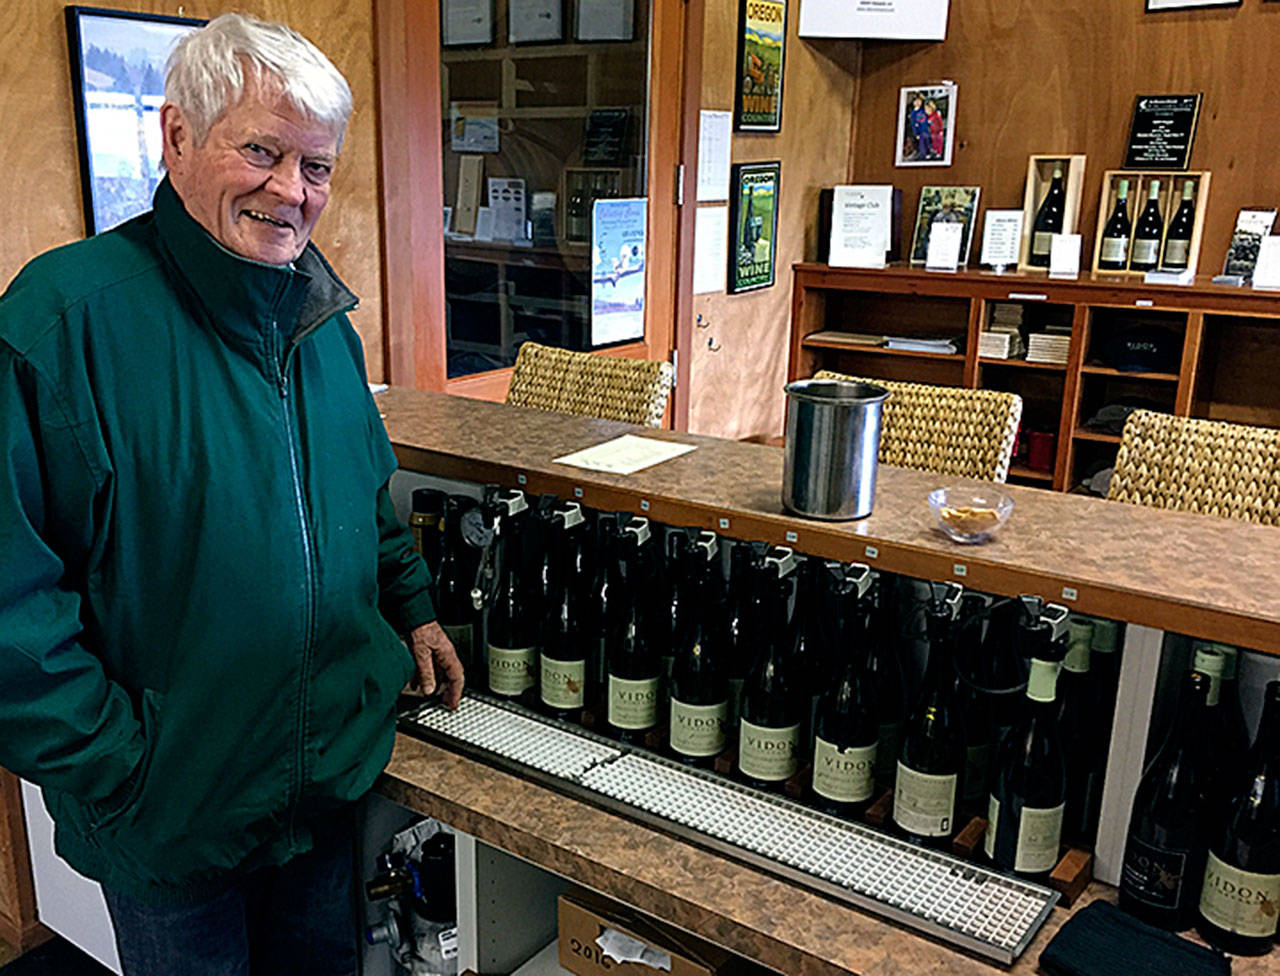 Don Hagge grew up in North Dakota, flew for the Navy in the Korean War and became a physicist for NASA. He retired in 1999 at the age 65 and began planting his vineyard near Newberg, Ore. Earlier this year, an estate Pinot Noir he made under his Vidon Vineyard brand earned a gold medal at the San Francisco Chronicle. (Photo by Eric Degerman/Great Northwest Wine)